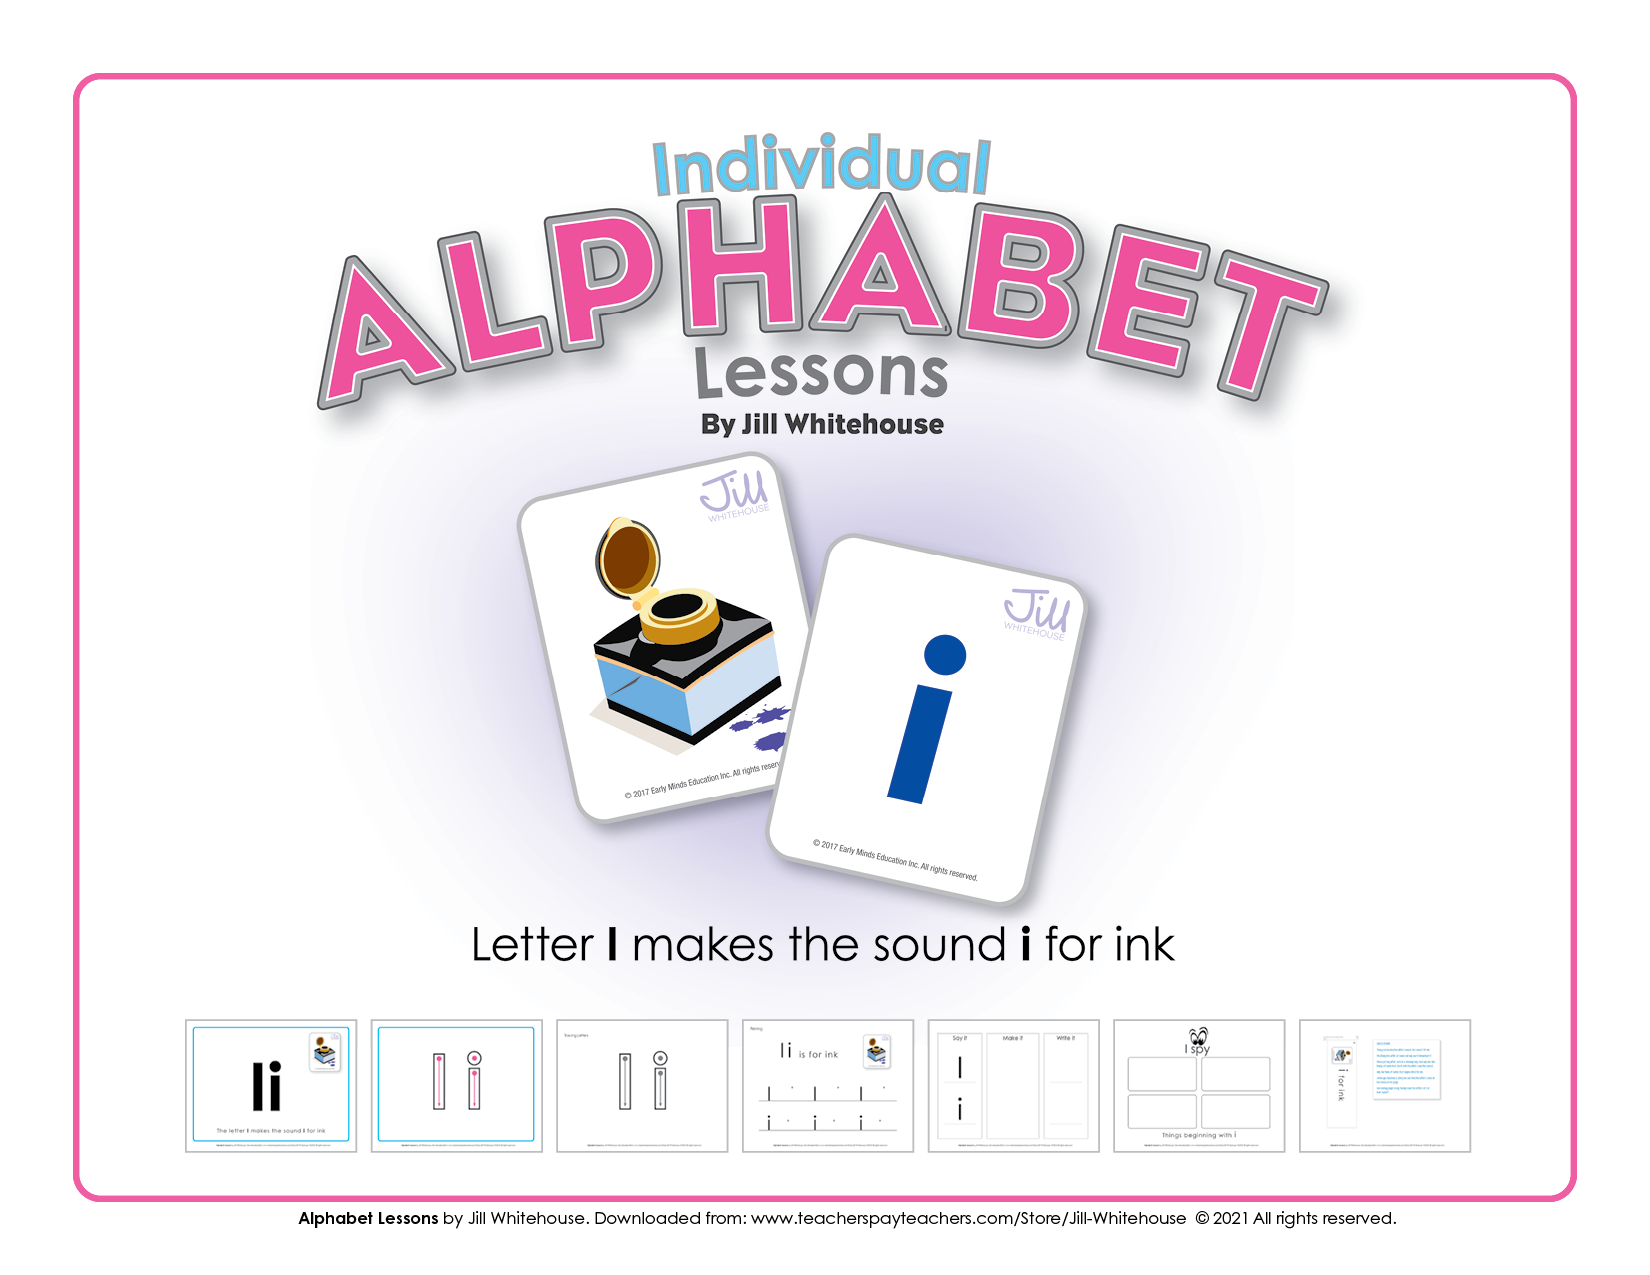 Alphabet lessons I cover product image